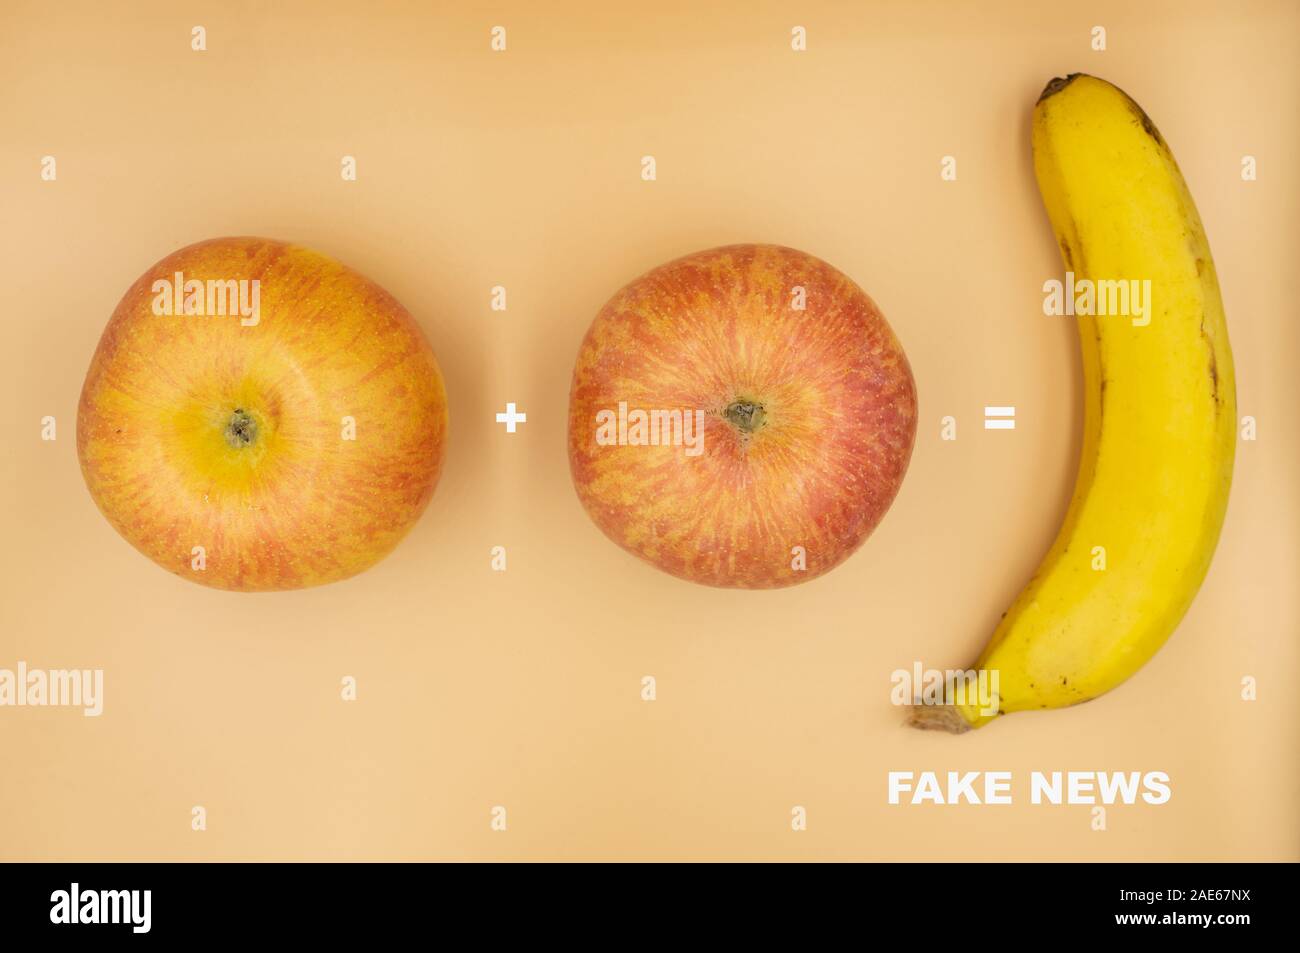 Two apples added together equal a banana,concept image of Fake News. Stock Photo